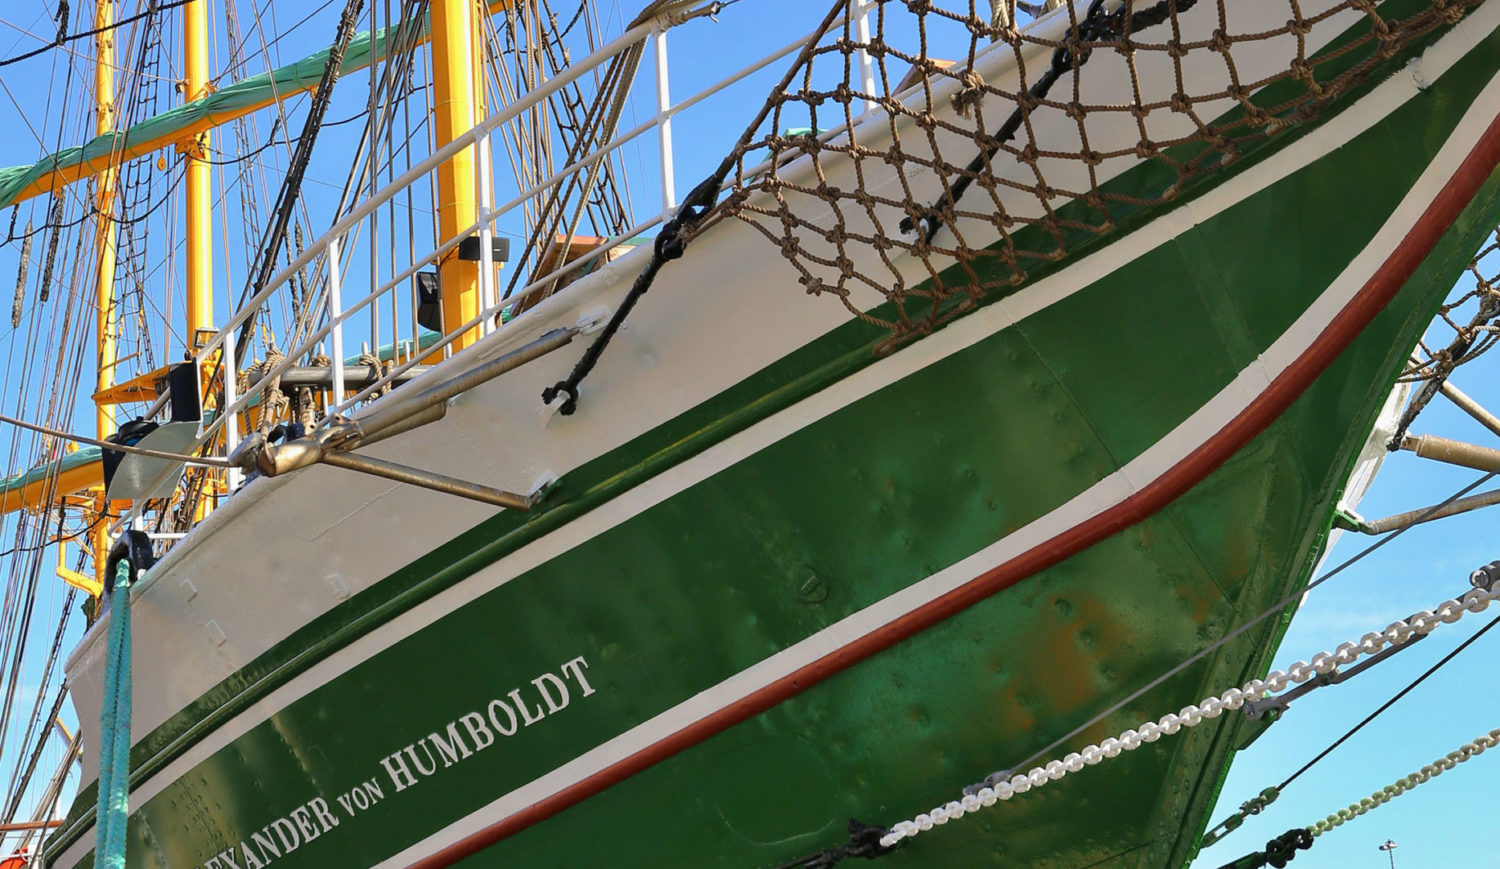 The ship with the green sails has already seen a lot - the Alexander von Humboldt has found its resting place in Bremen